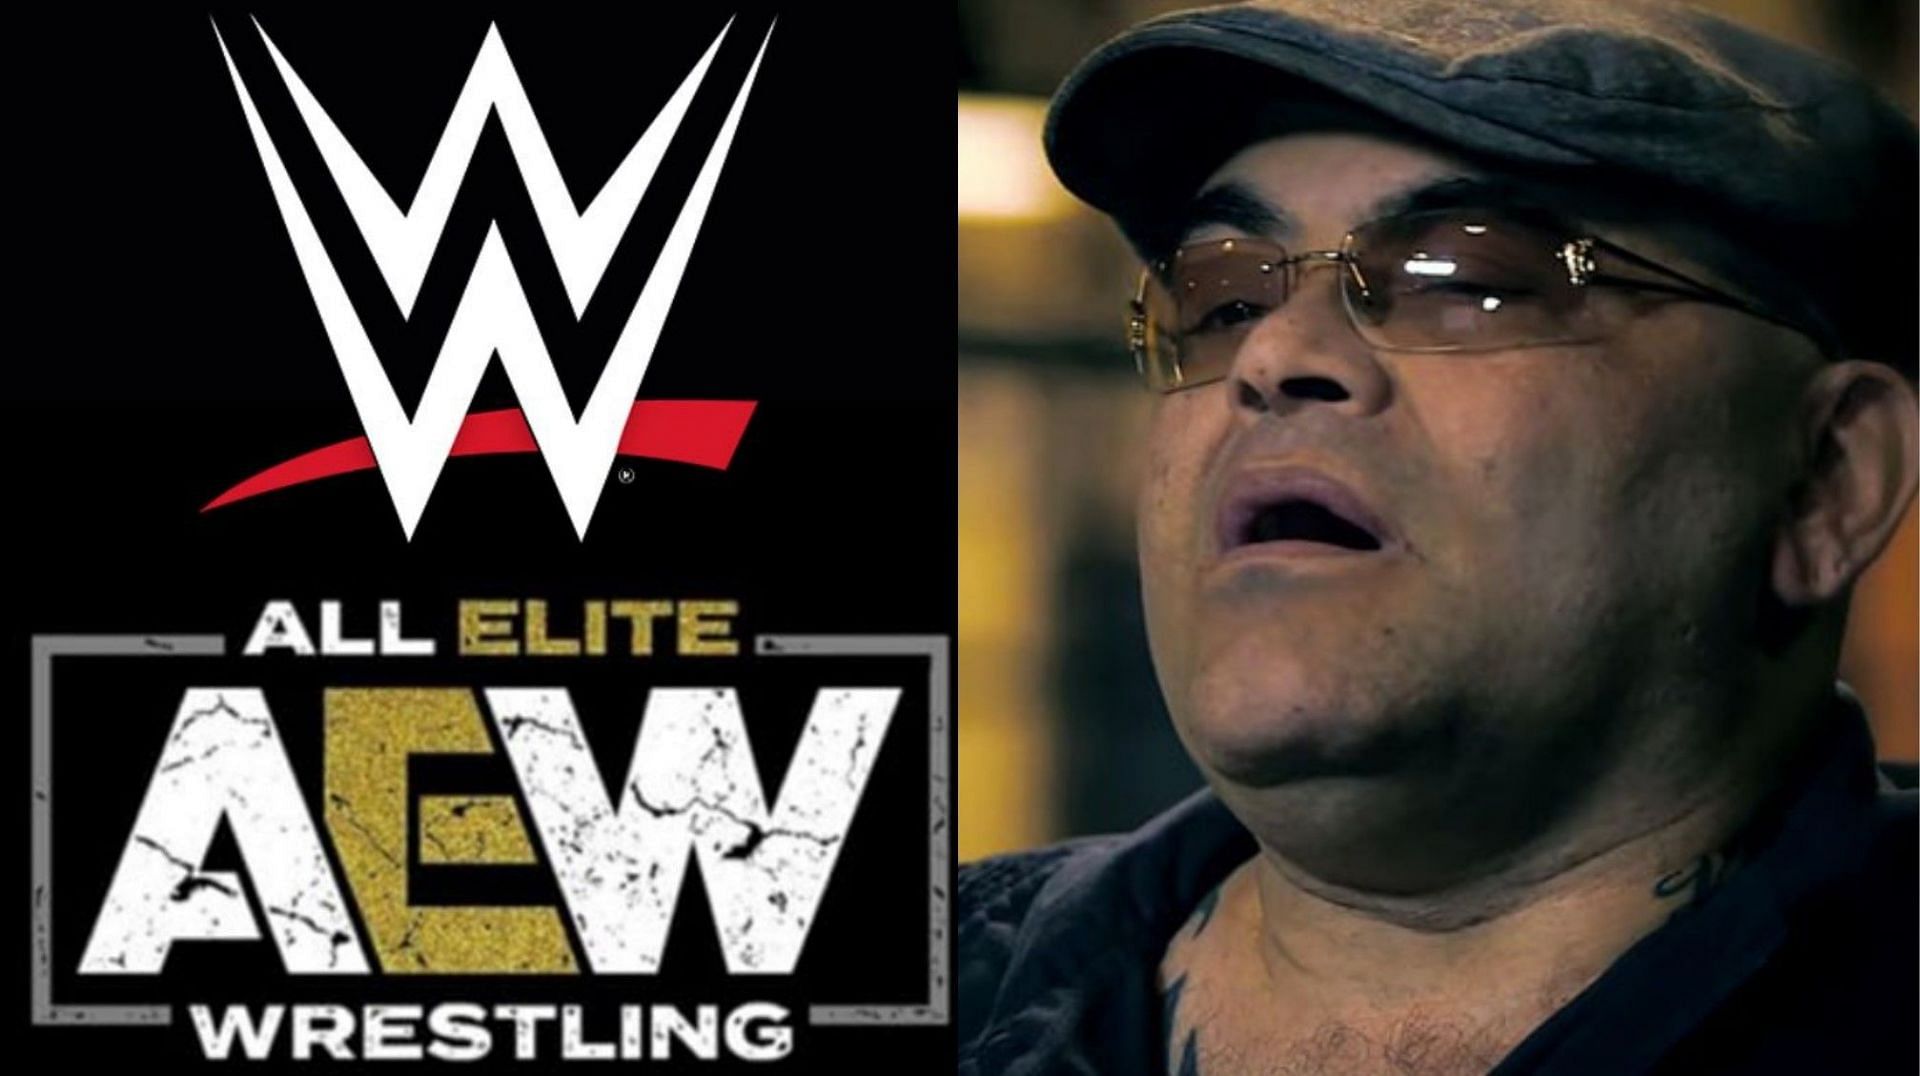 Konnan wants to see significant change in character of a top AEW star